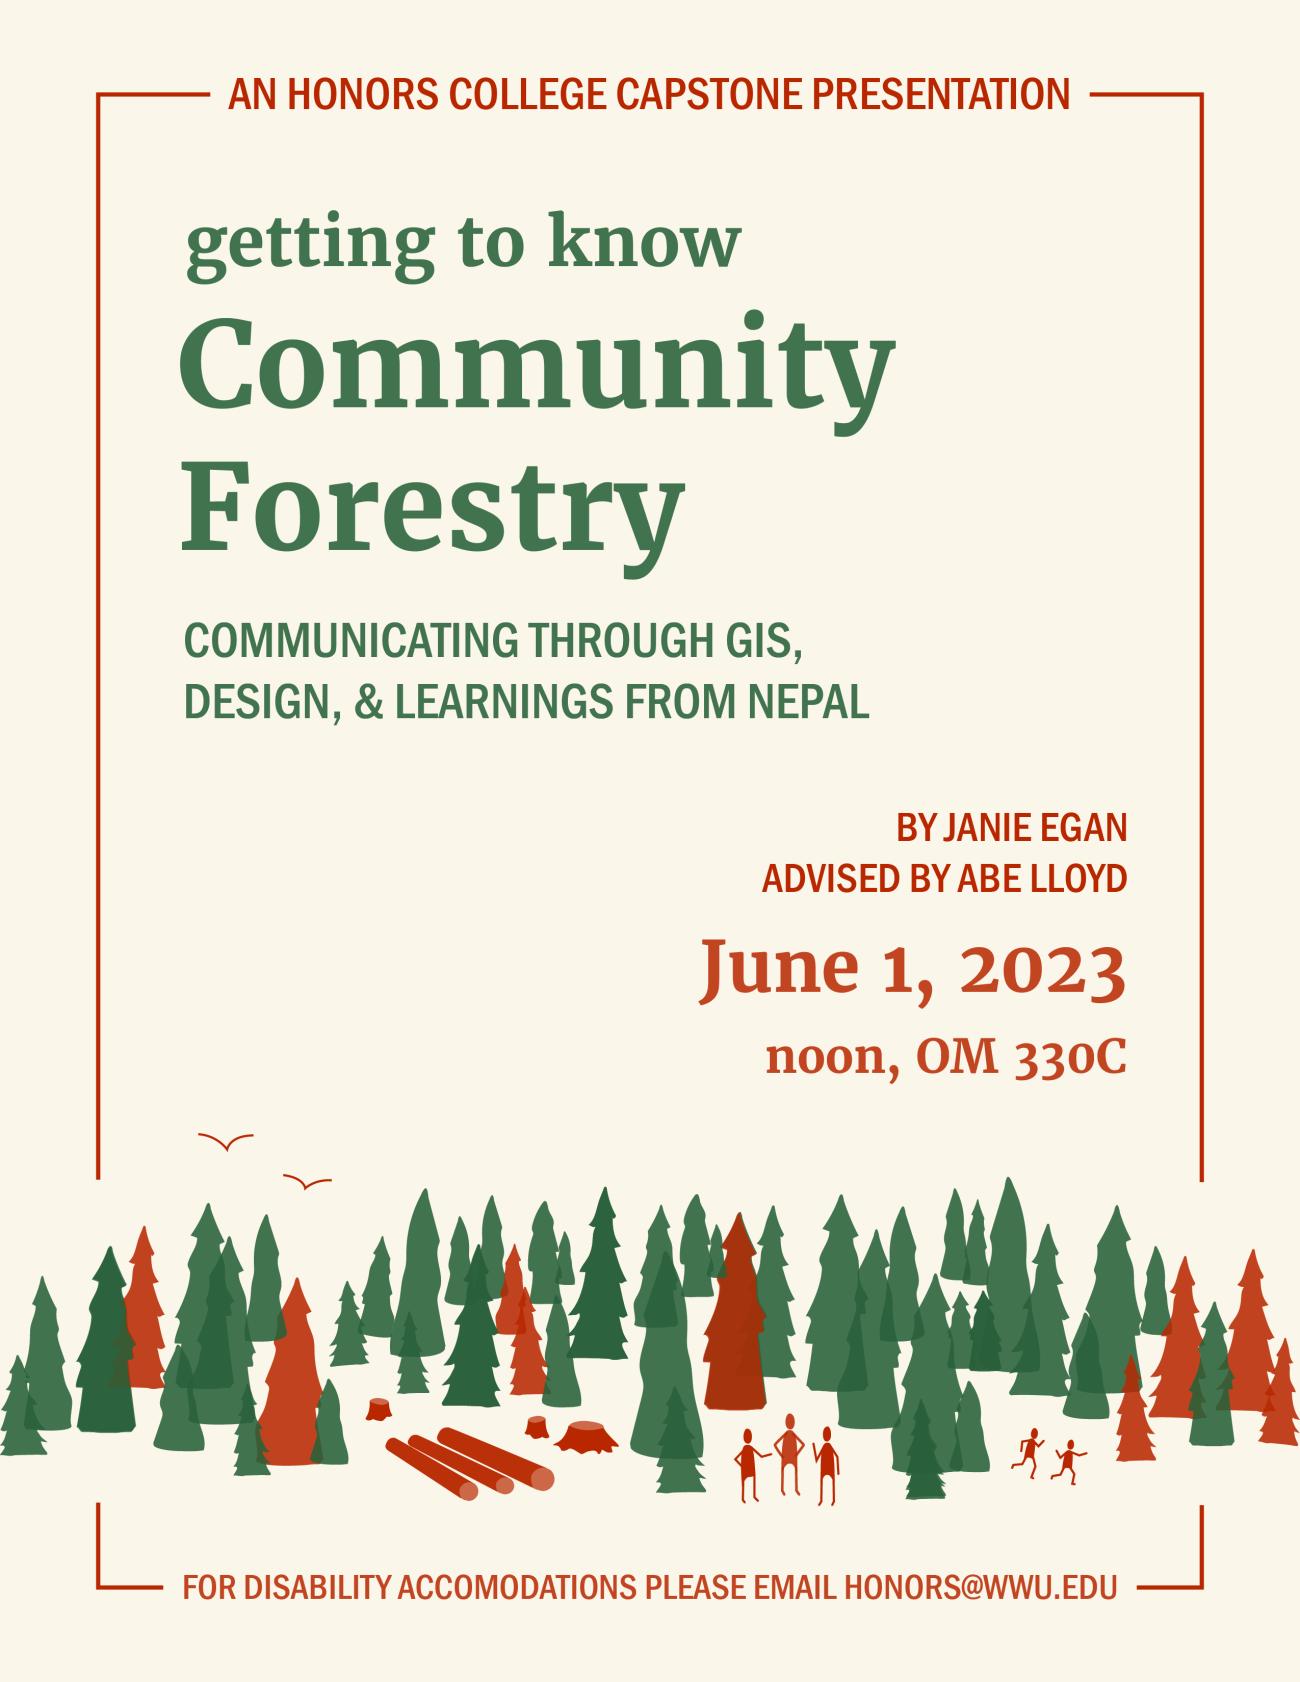 Beige poster with blue and red text, and an illustration of people using a forest in different ways. Text reads "Getting to Know Community Forestry: communicating through GIS, Design and Learnings from Nepal. by Janie Egan. Advised by Abe Lloyd. Presentation on June 1, 2023 at noon in Old Main 330C. For Disability Accommodations please email honors@wwu.edu".